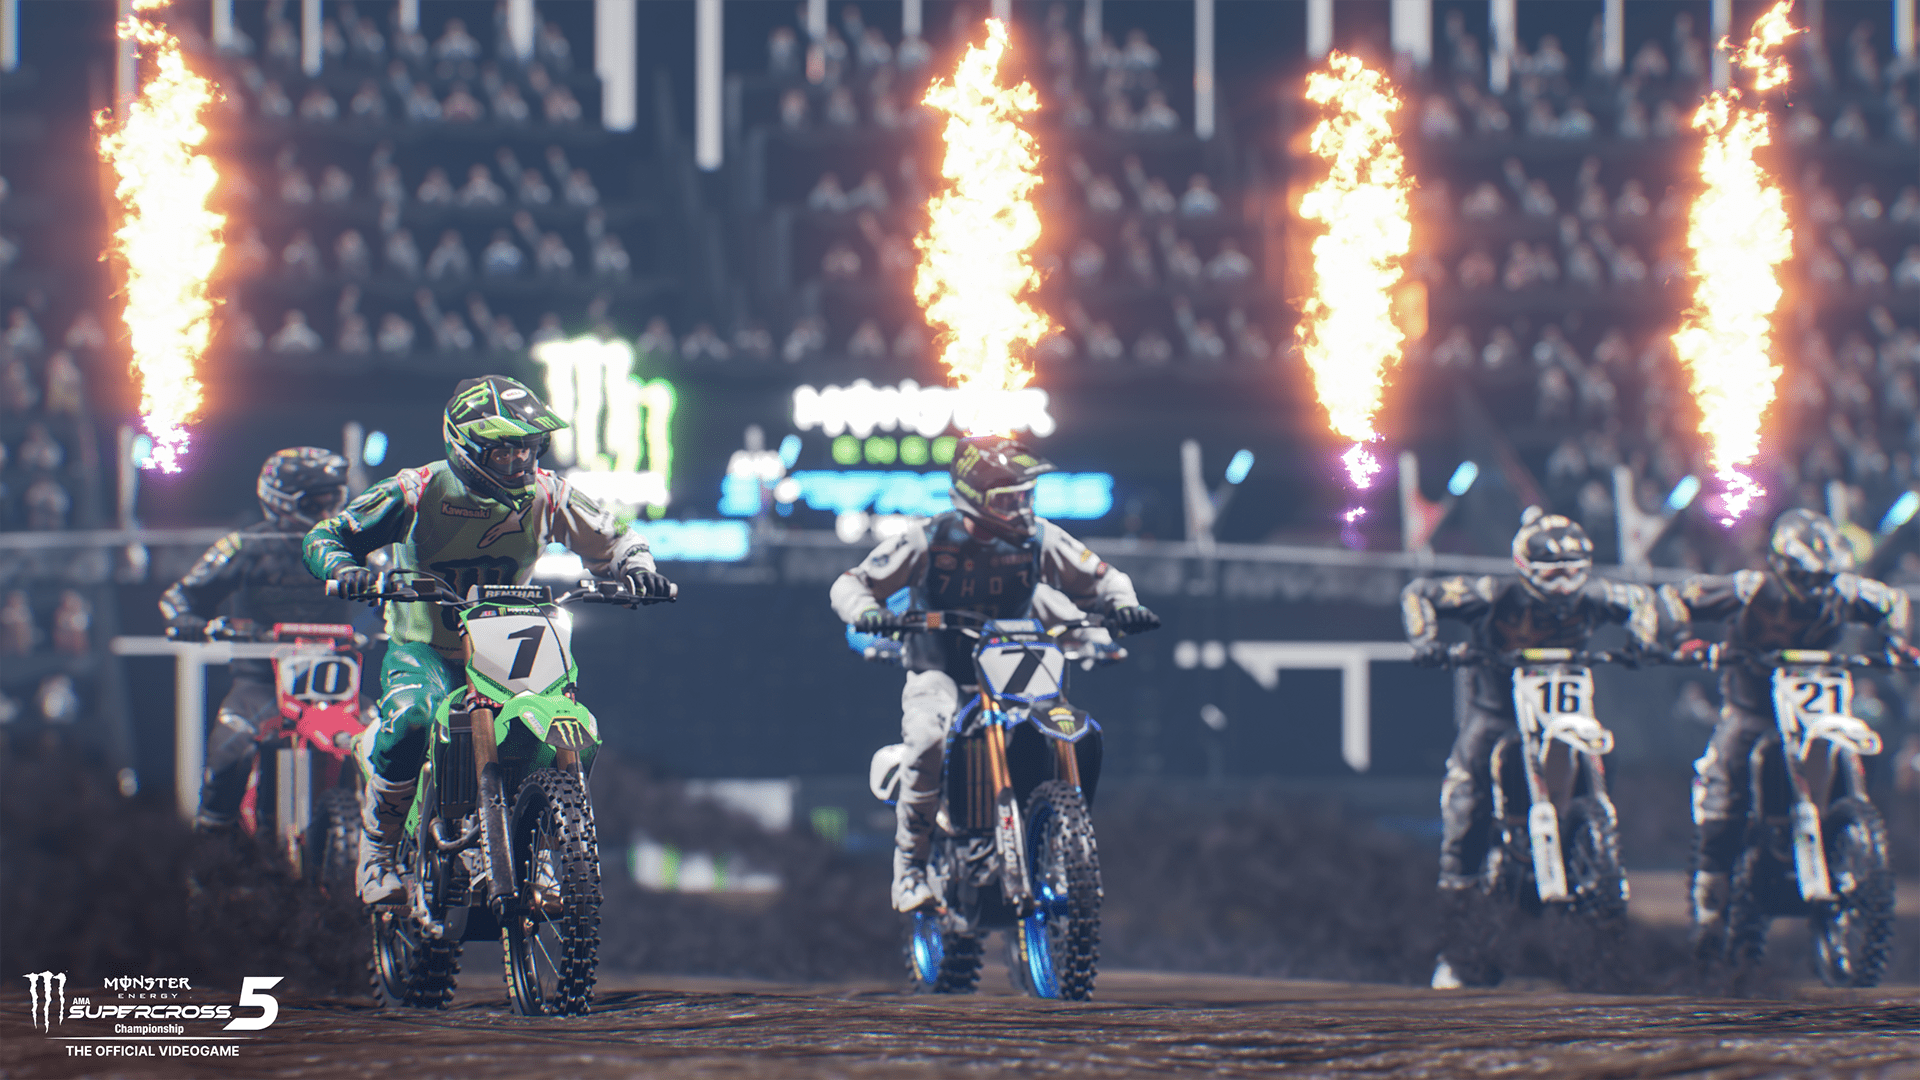 Monster Energy Supercross – The Official Videogame 5 Special Edition now available for consoles